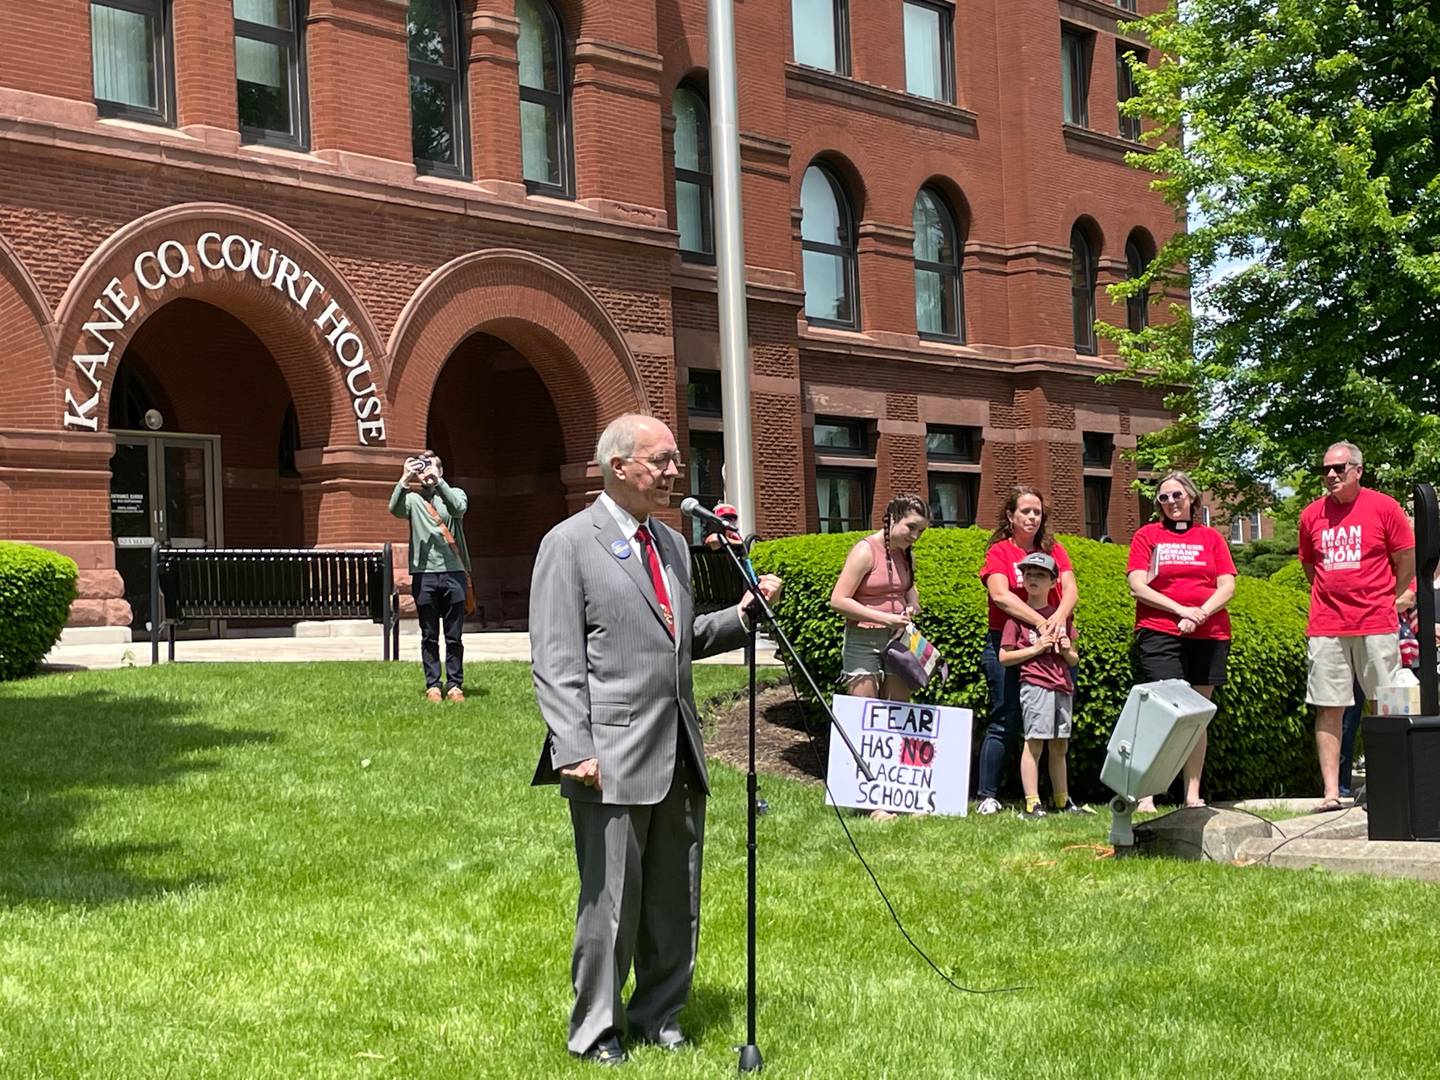 U.S. Rep. Bill Foster, D-Naperville, spoke at a rally against gun violence in Geneva on Saturday. Foster told the crowd that he is "so sick and tired of reading the stories" about gun violence.